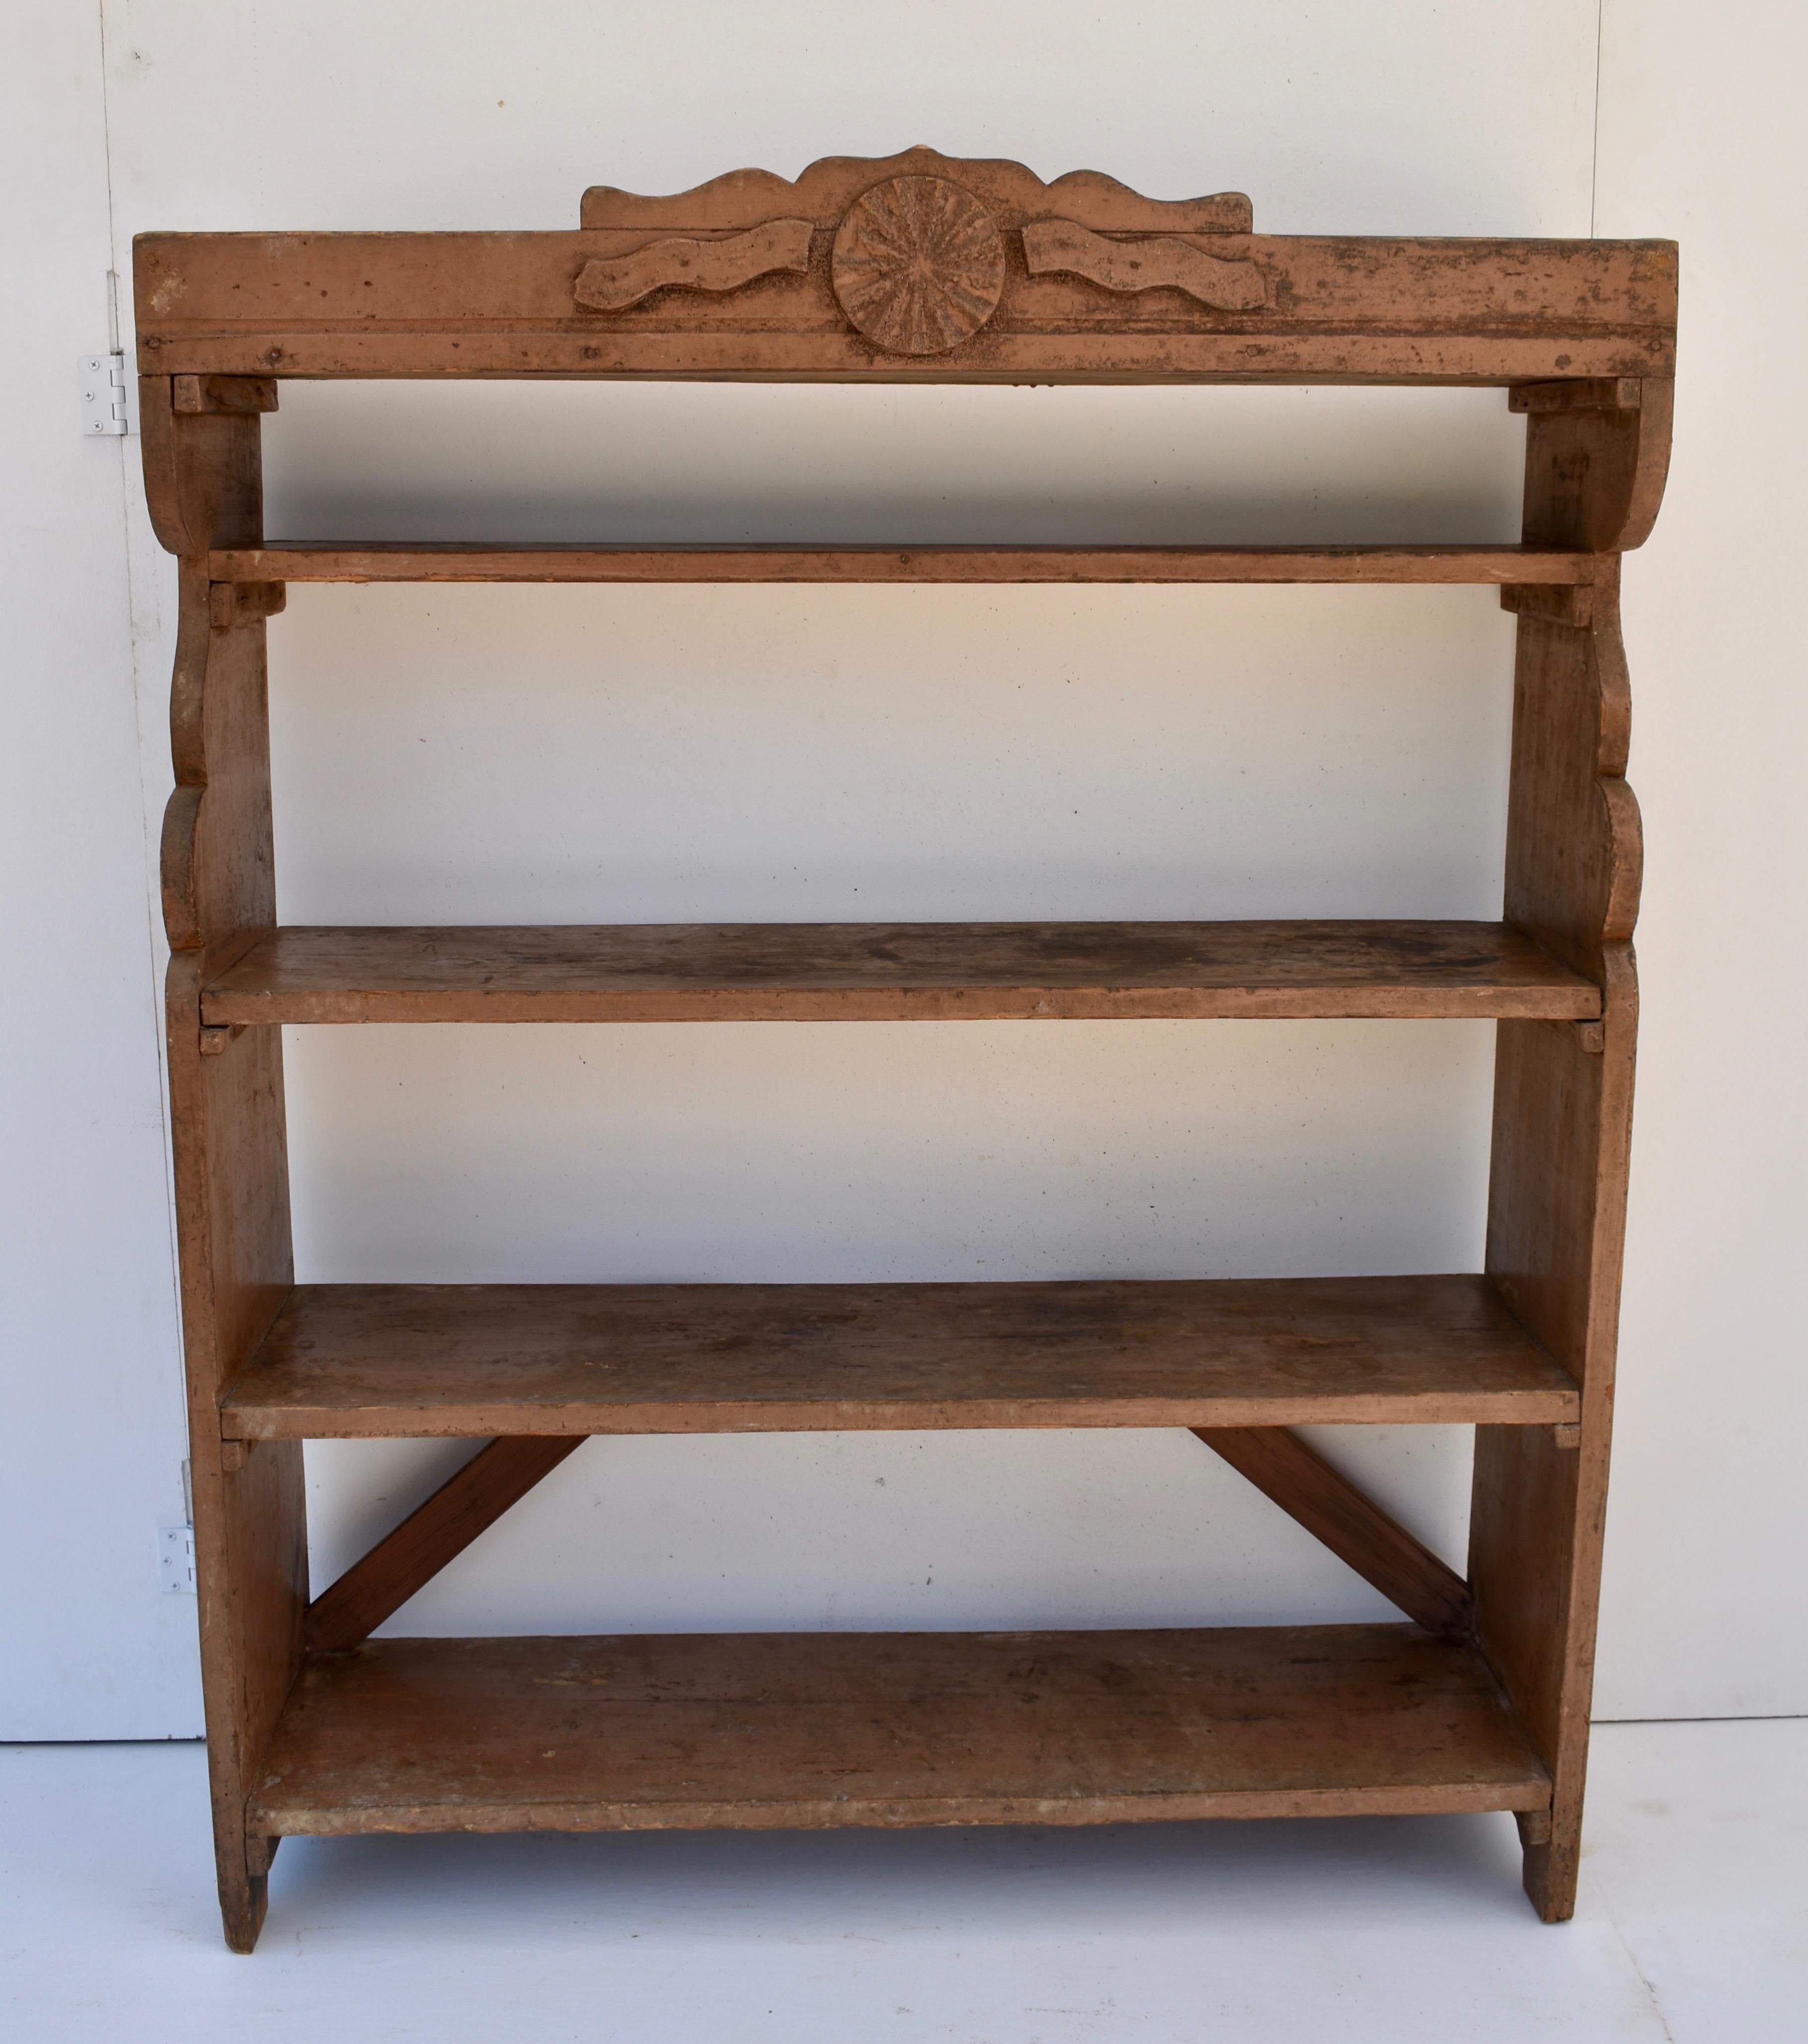 A gallery bearing a central medallion and applied moldings encloses the top shelf. The curvilinear sides support a further four shelves, generously spaced. The lower back is cross-braced for stability. In rich dark rugger brown wax.